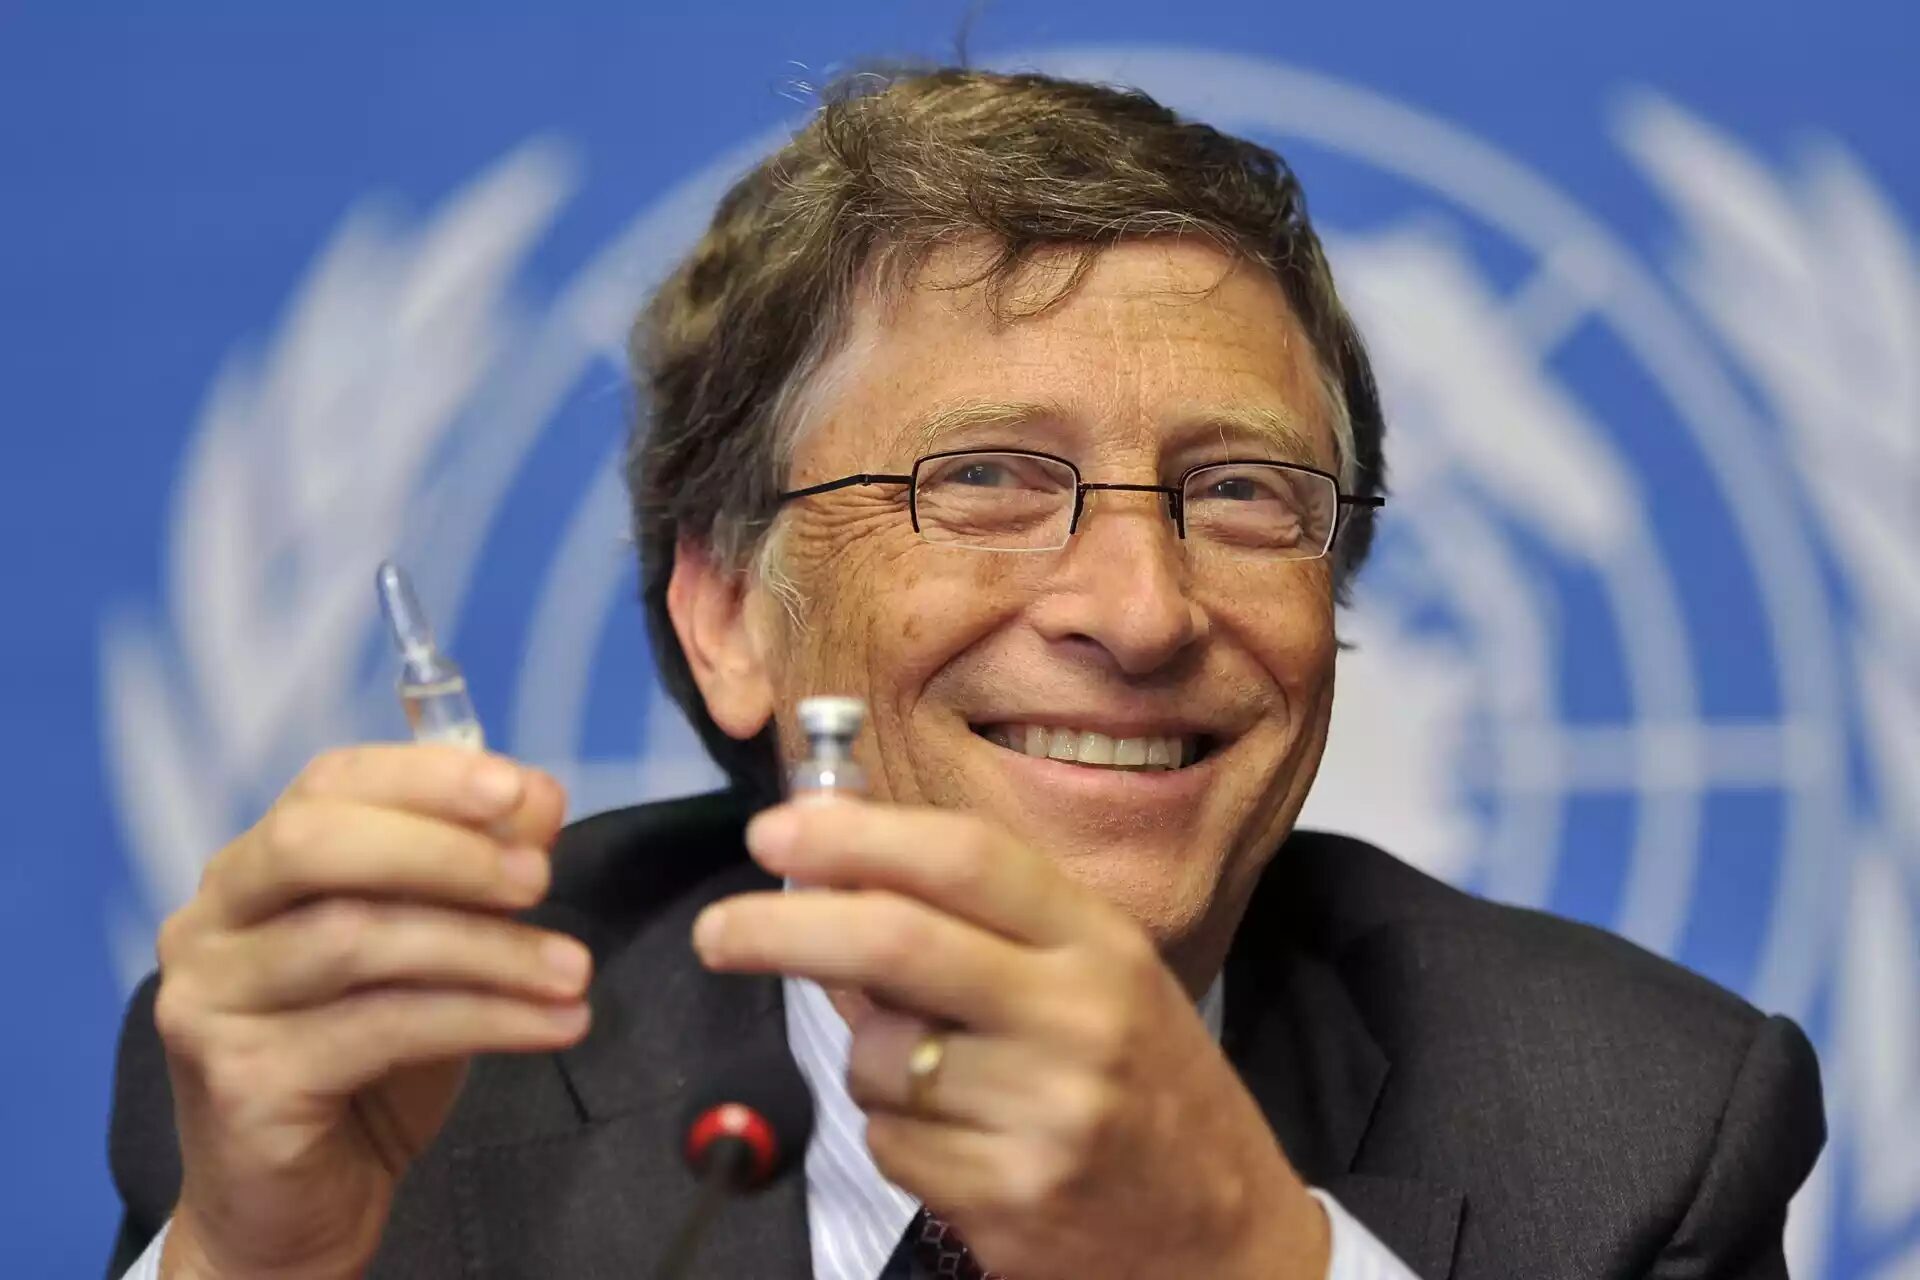 Bill Gates holds up a vaccine